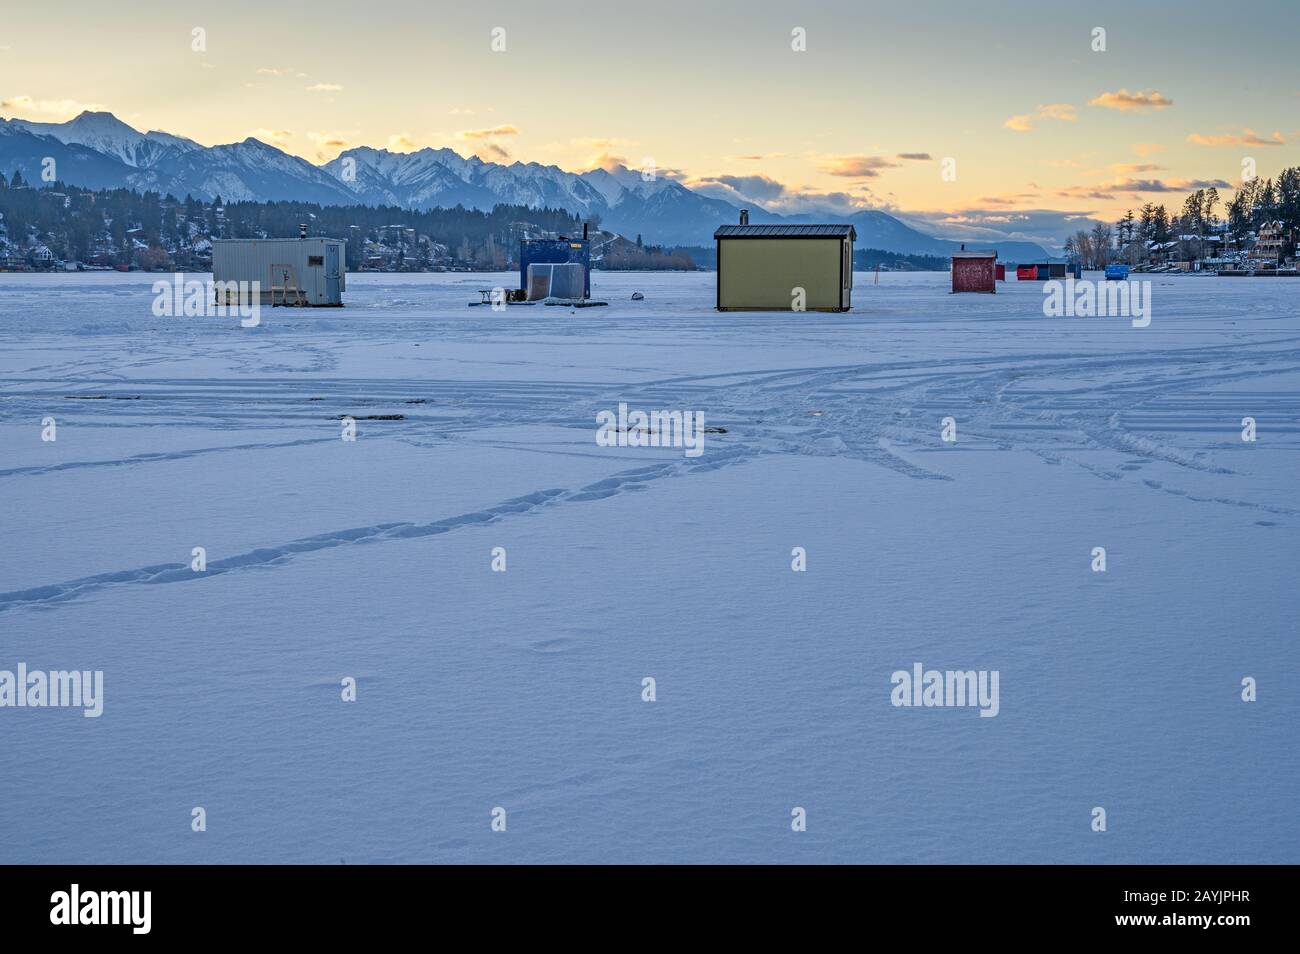 Ice fishing shacks on Lake Windermere at the town of Invermere, British Columbia, Canada Stock Photo